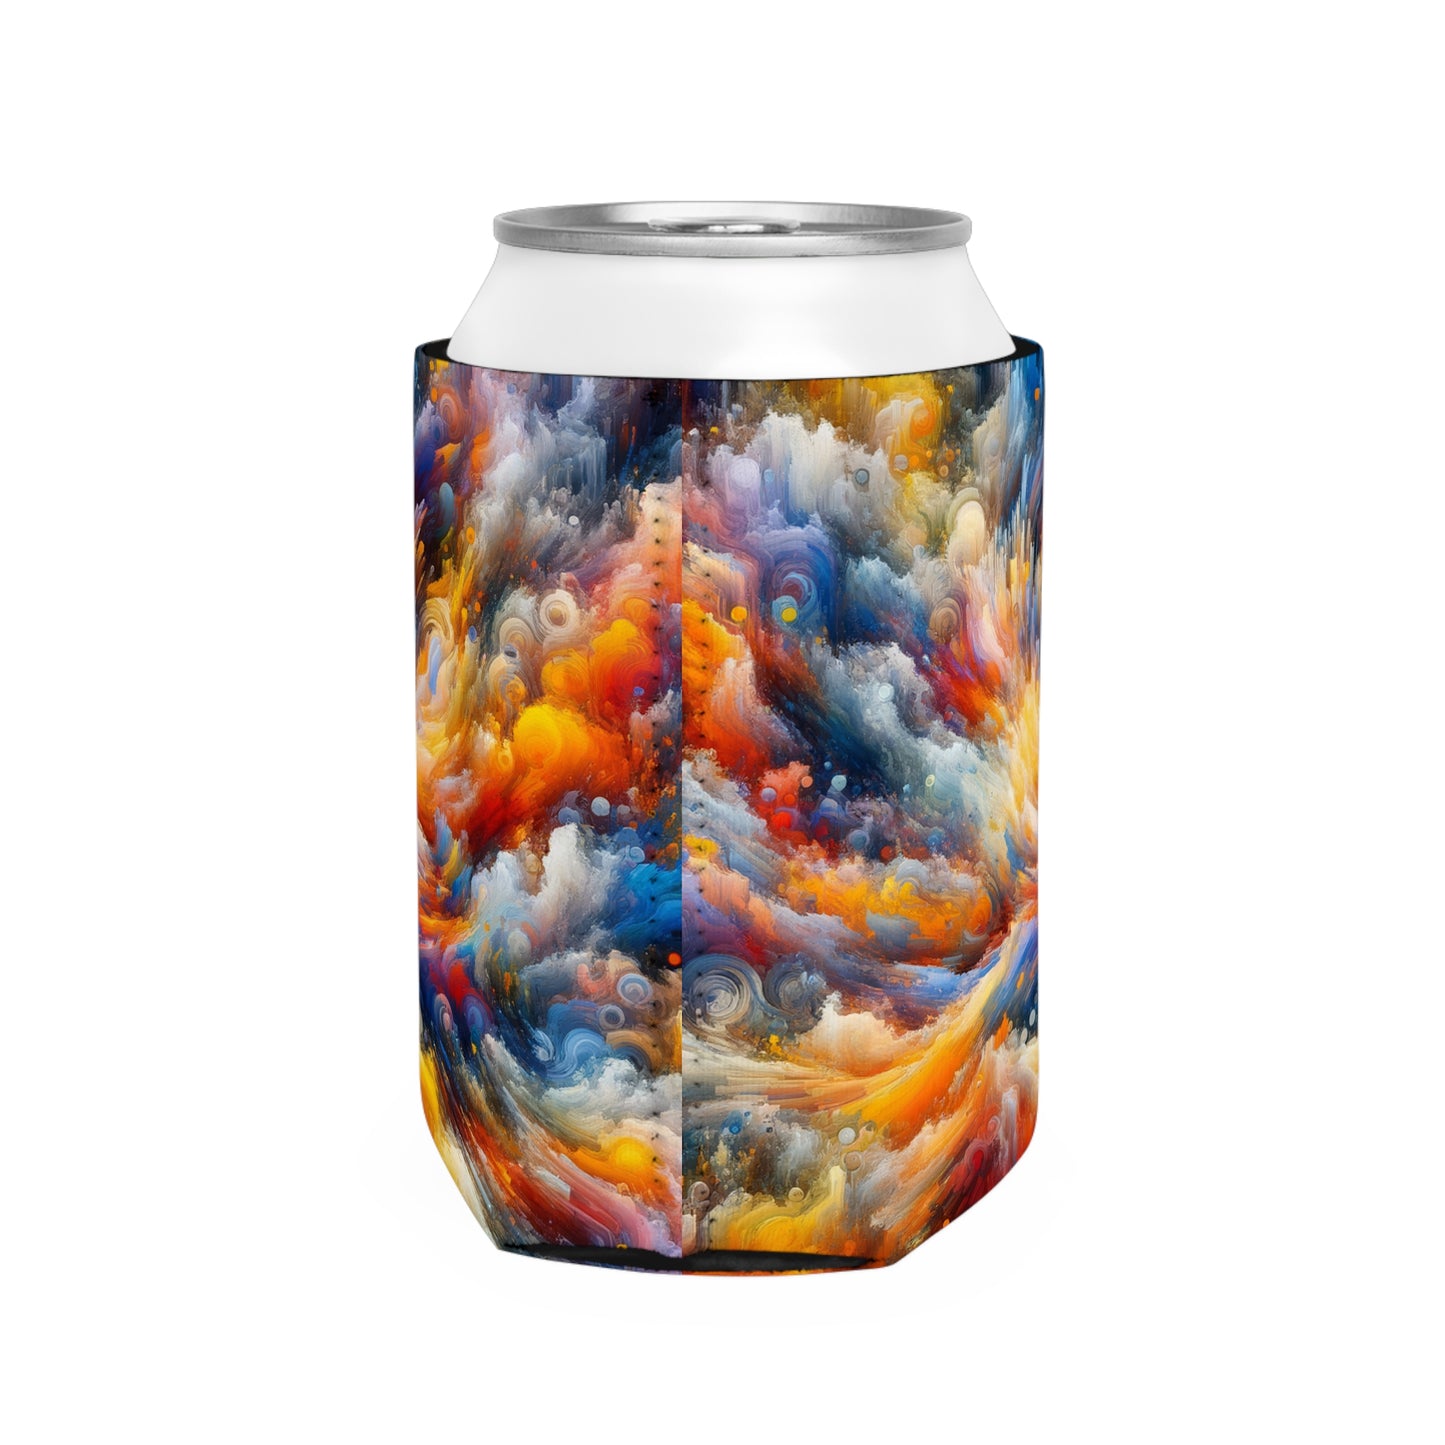 "Vibrant Chaos". - The Alien Can Cooler Sleeve Abstract Expressionism Style